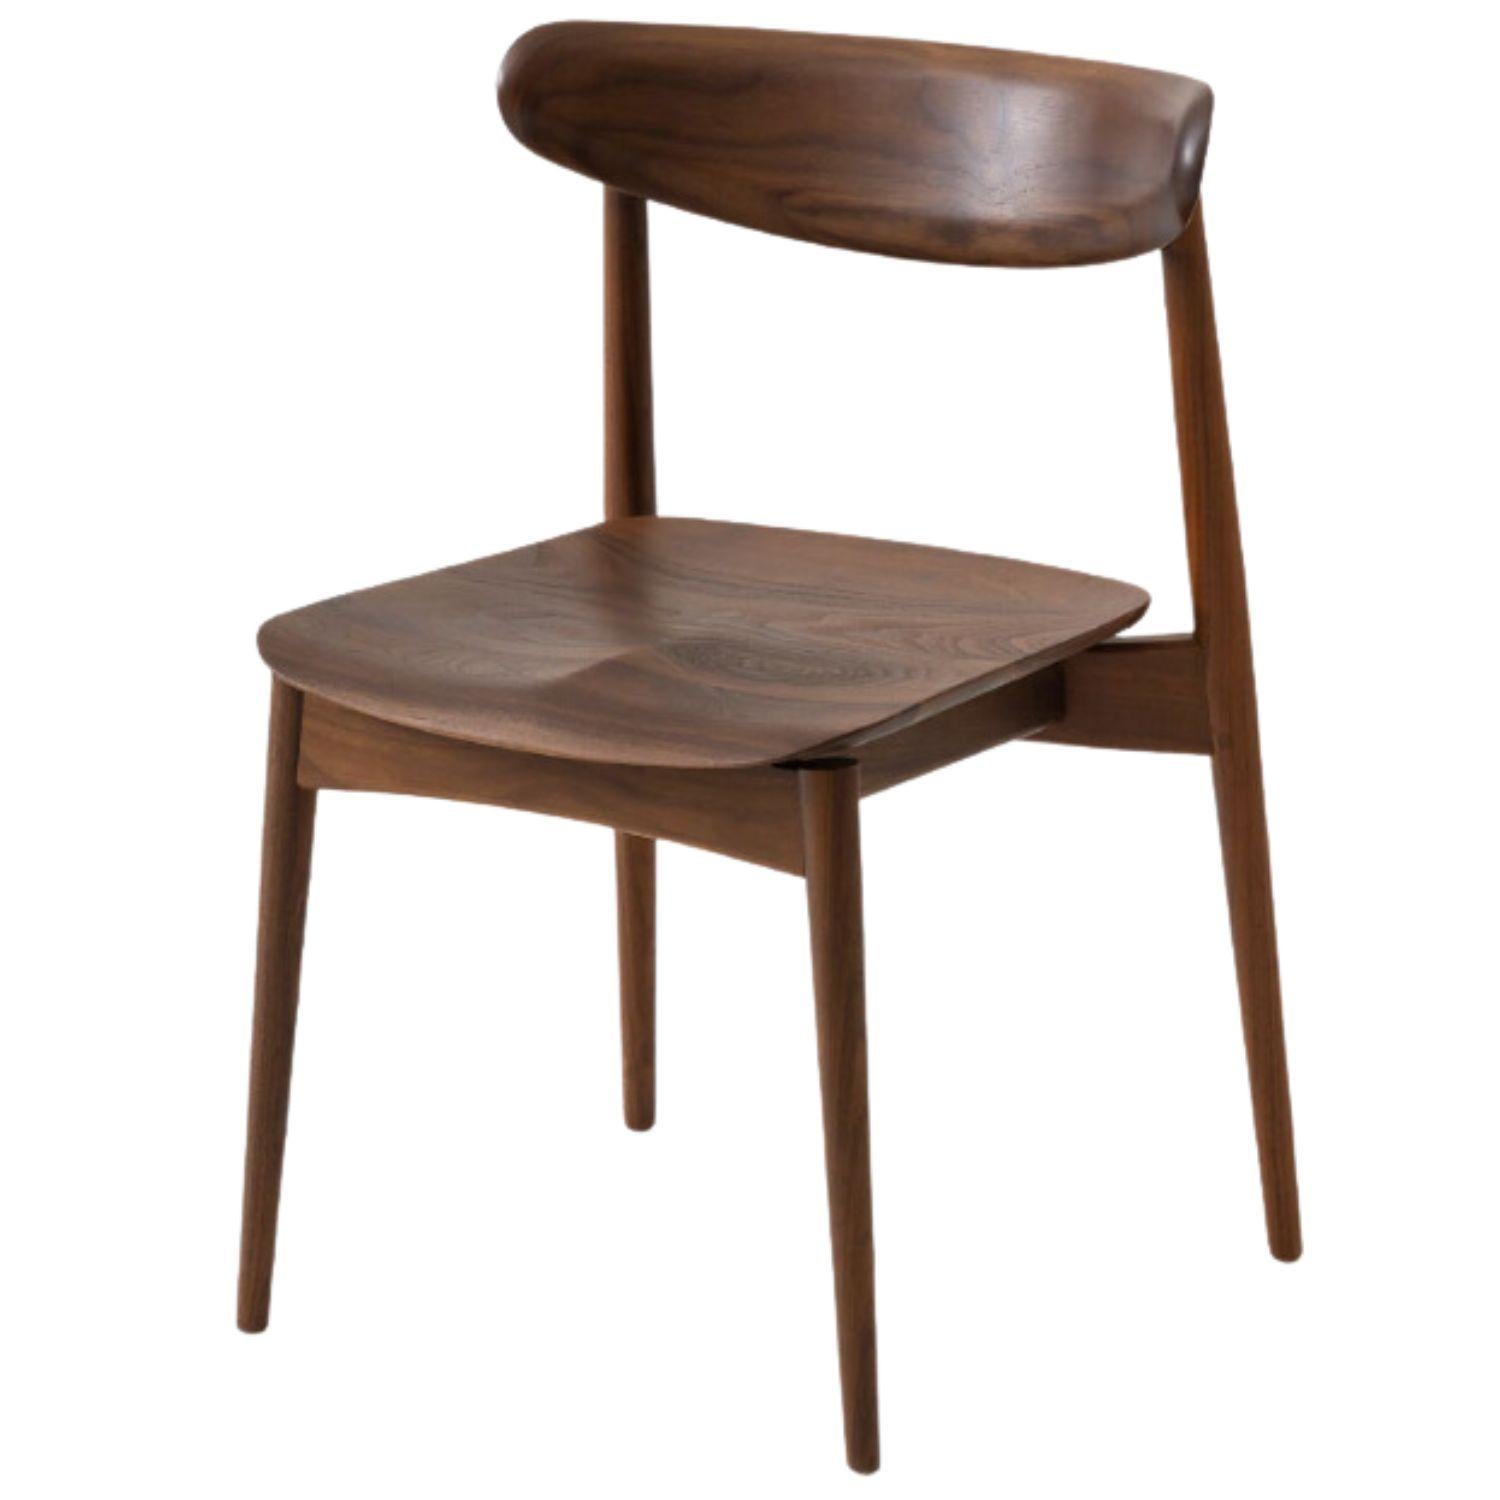 Motomi Kawakami 'Seoto KD201' Dining Chair in Walnut and Upholstery for Hida For Sale 7